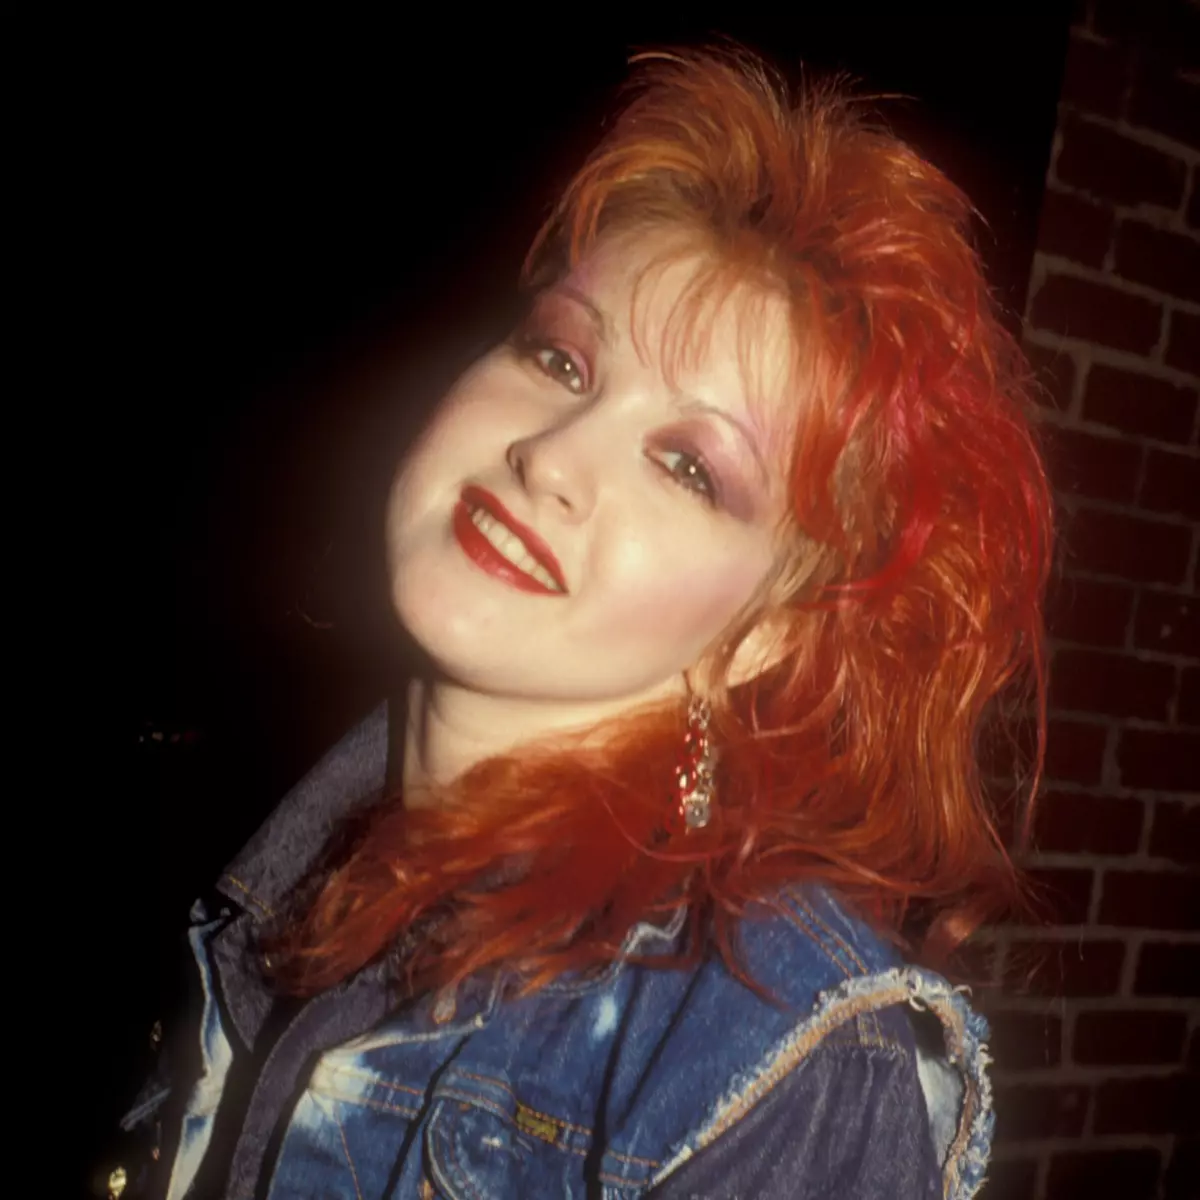 Cyndi Lauper and her iconic bright red hair, 1984